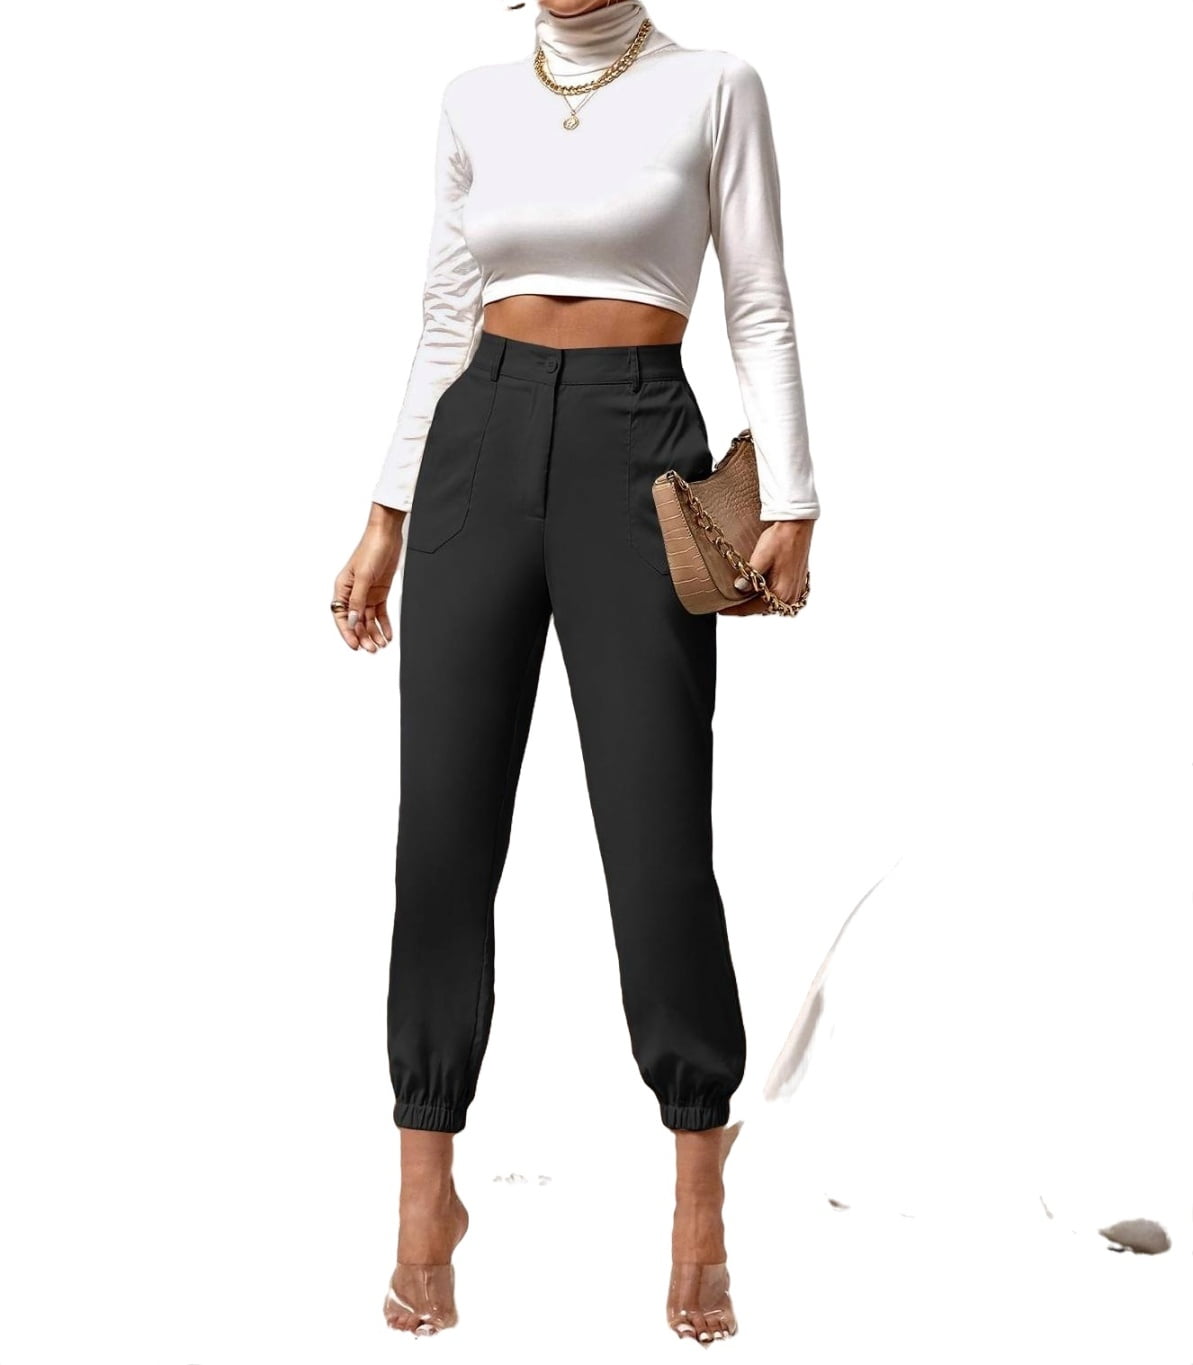 Women's Casual High Waist Comfy Cropped Tapered Pants Black